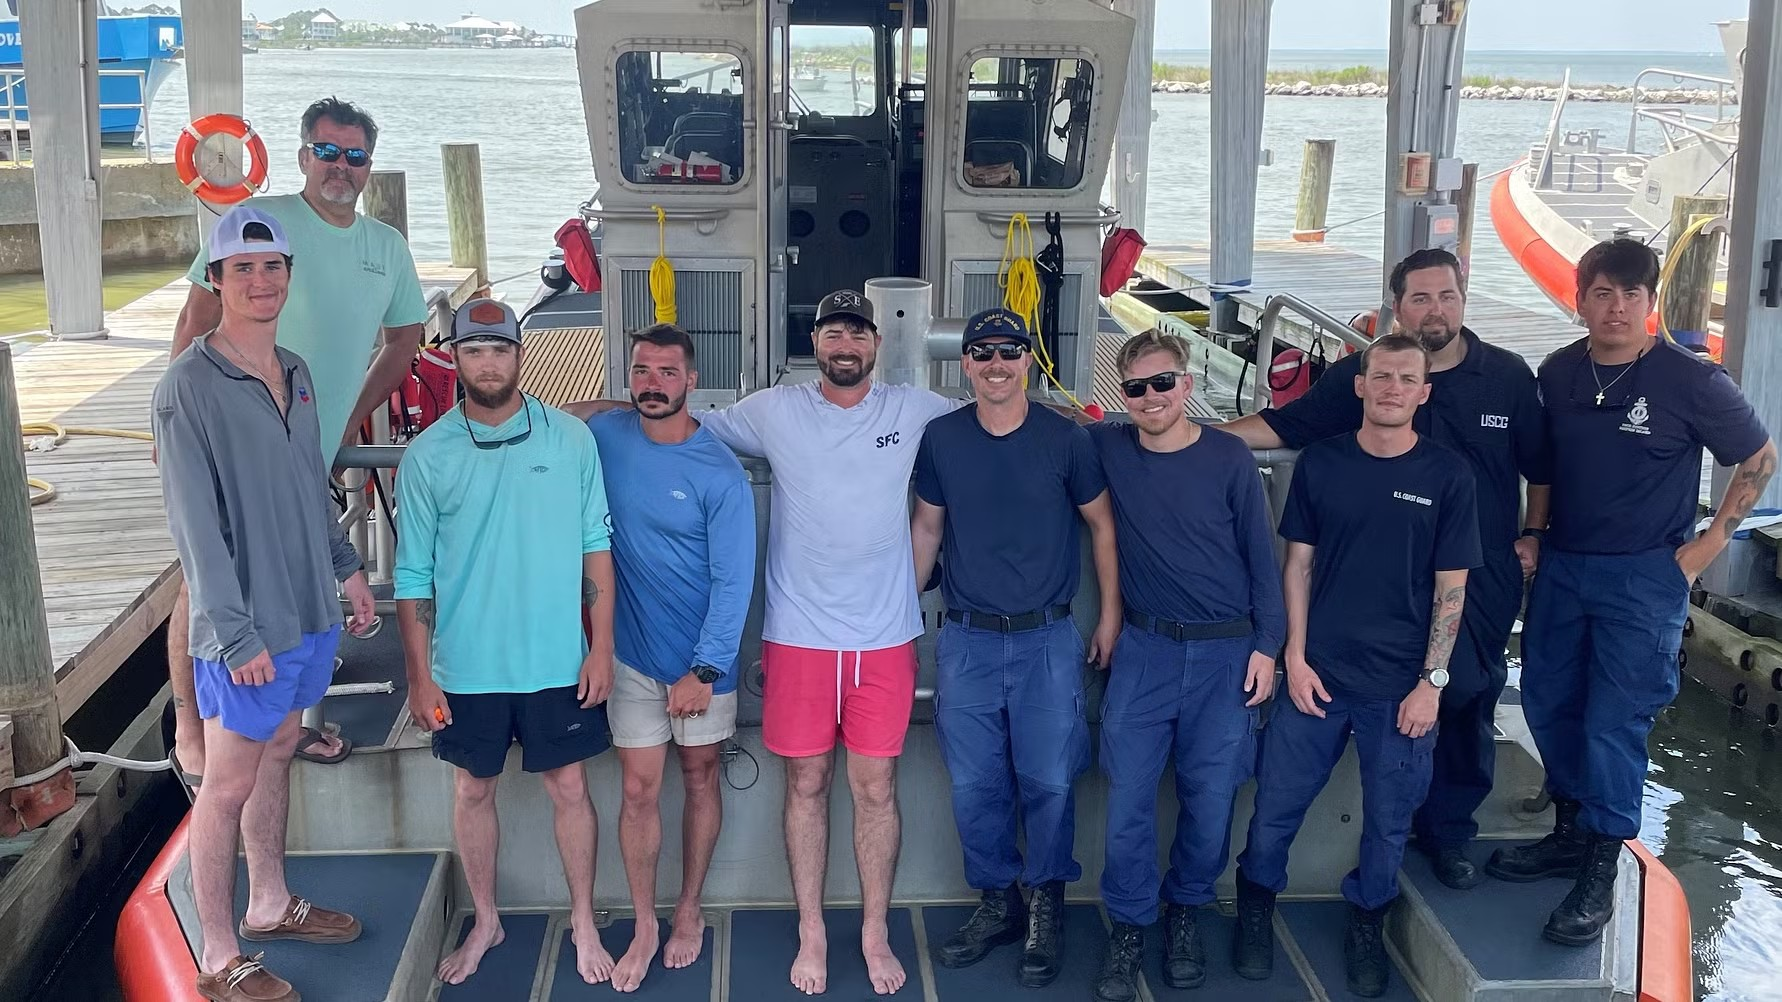 Girlfriend’s 21st birthday present saves Five Lives off Mississippi Gulf Coast on Memorial Weekend